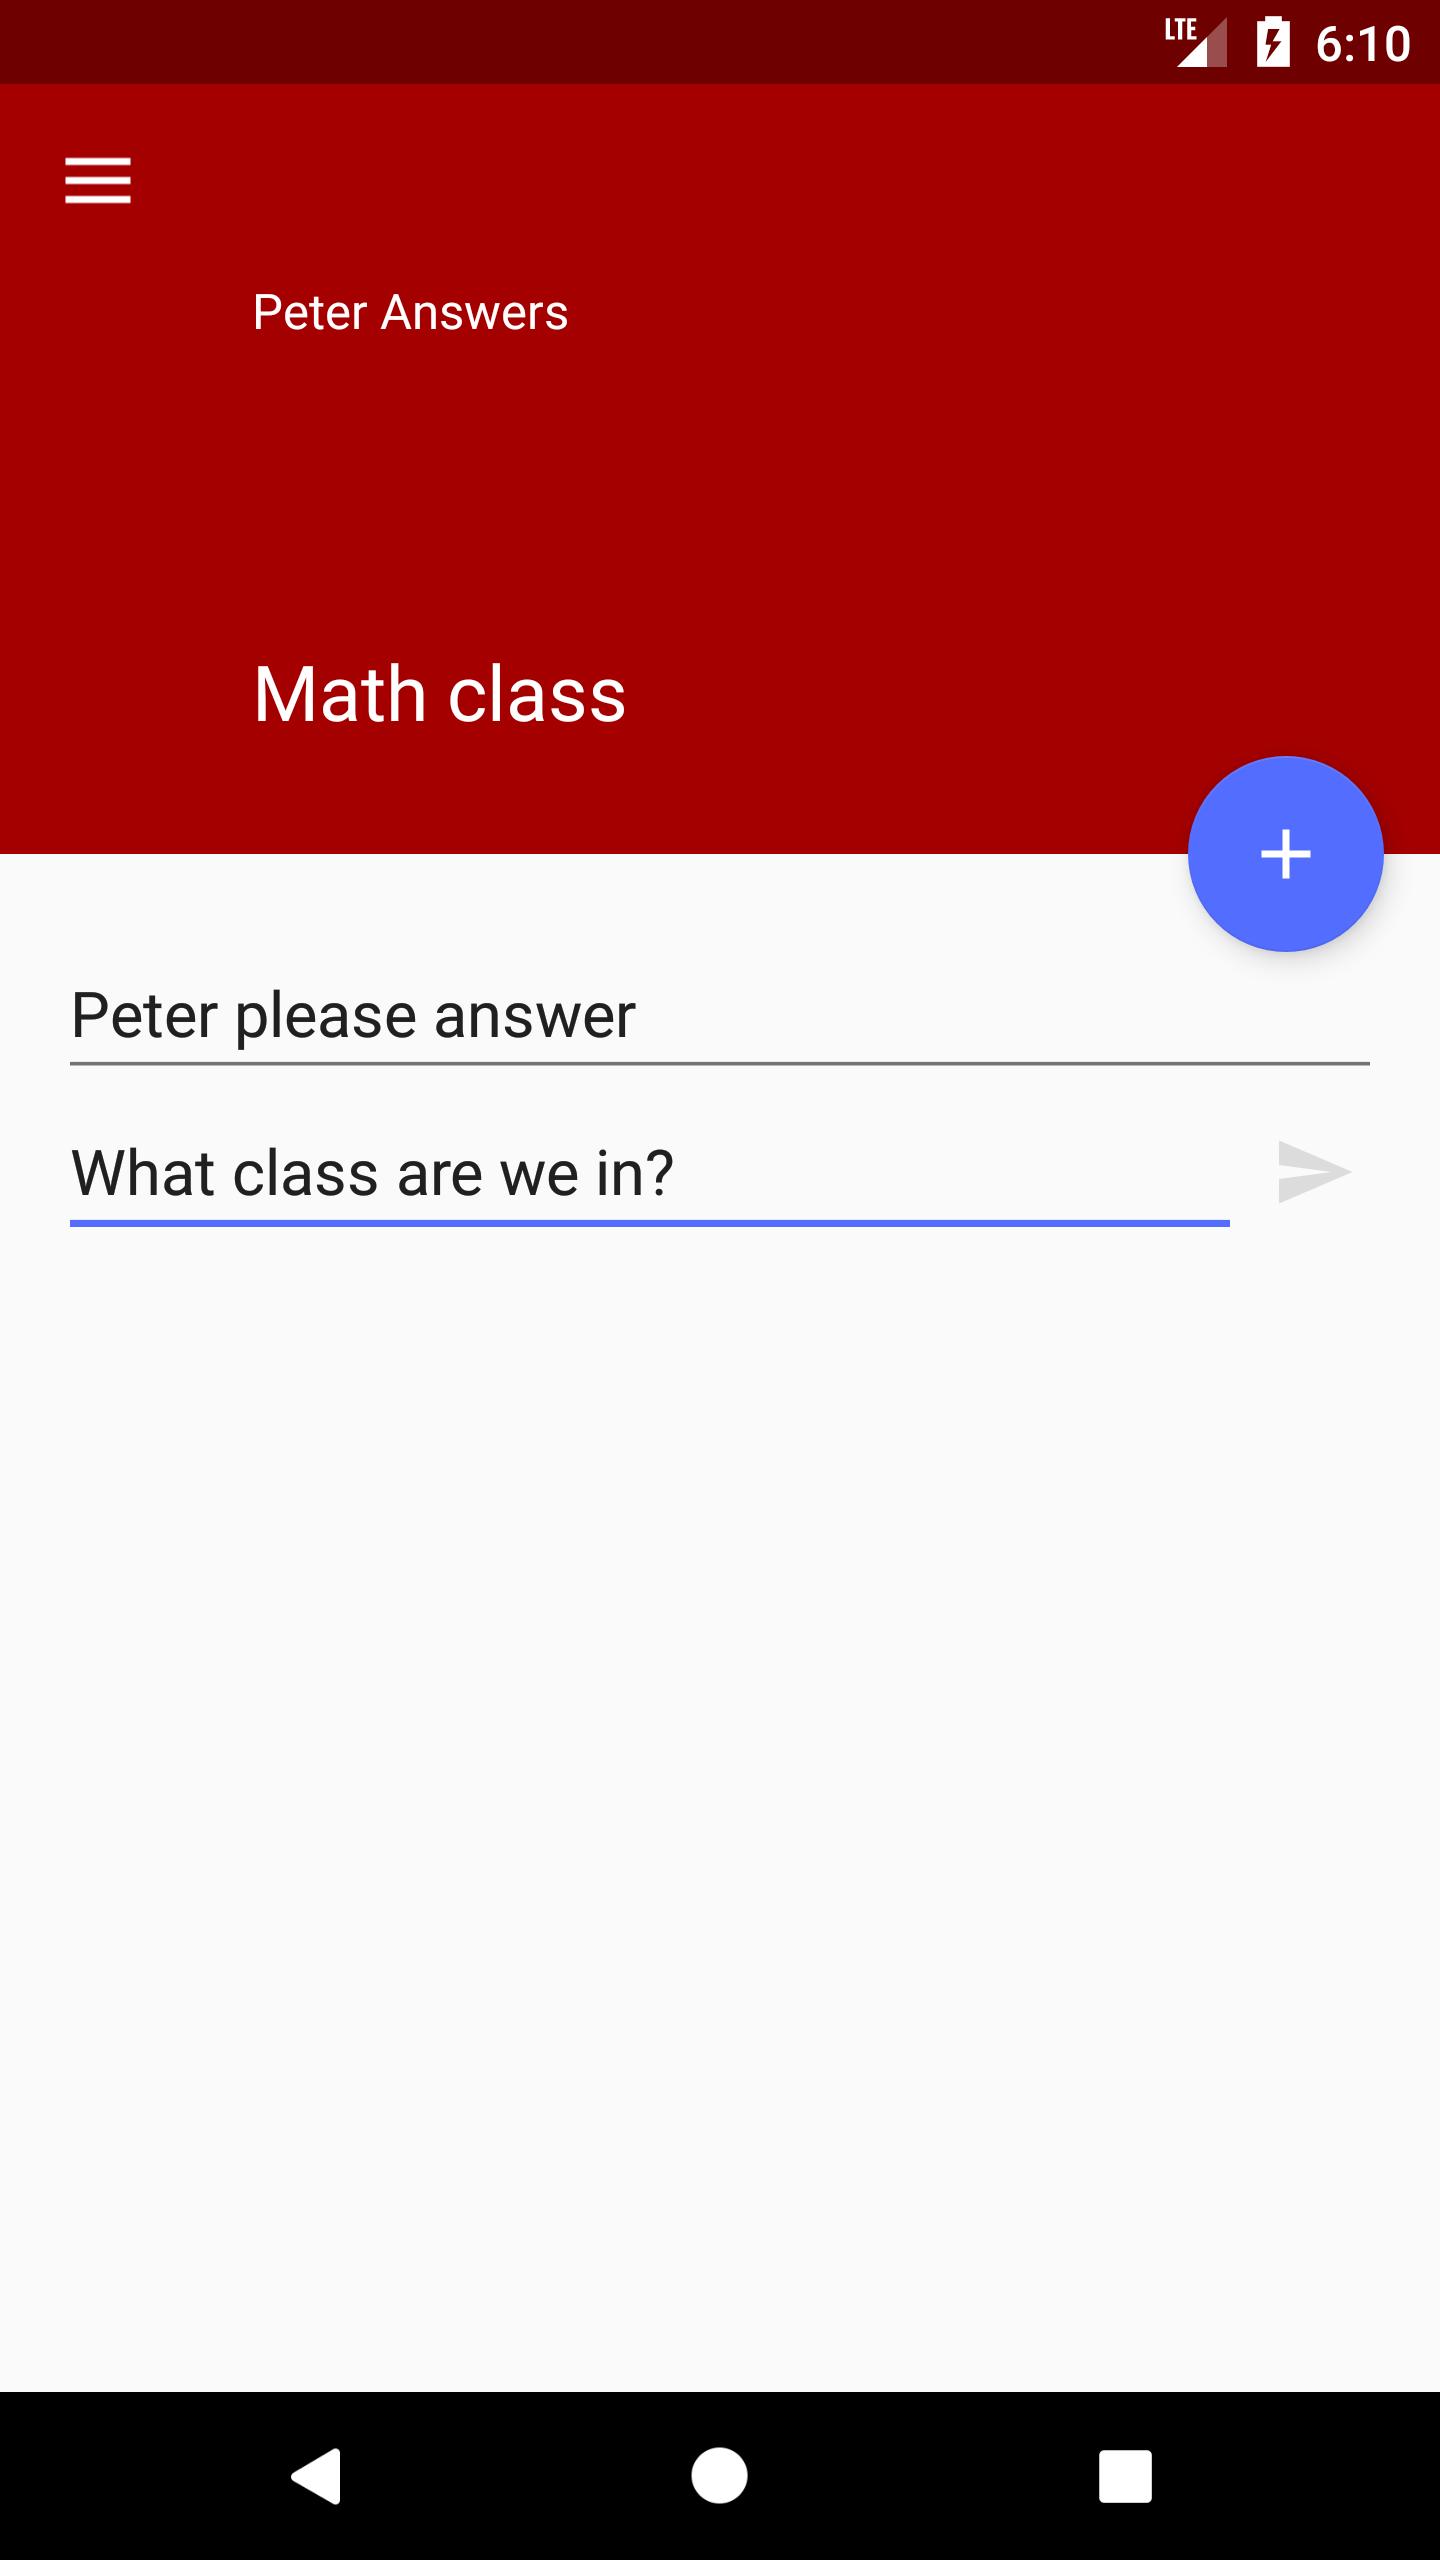 Peter answers. Peter please